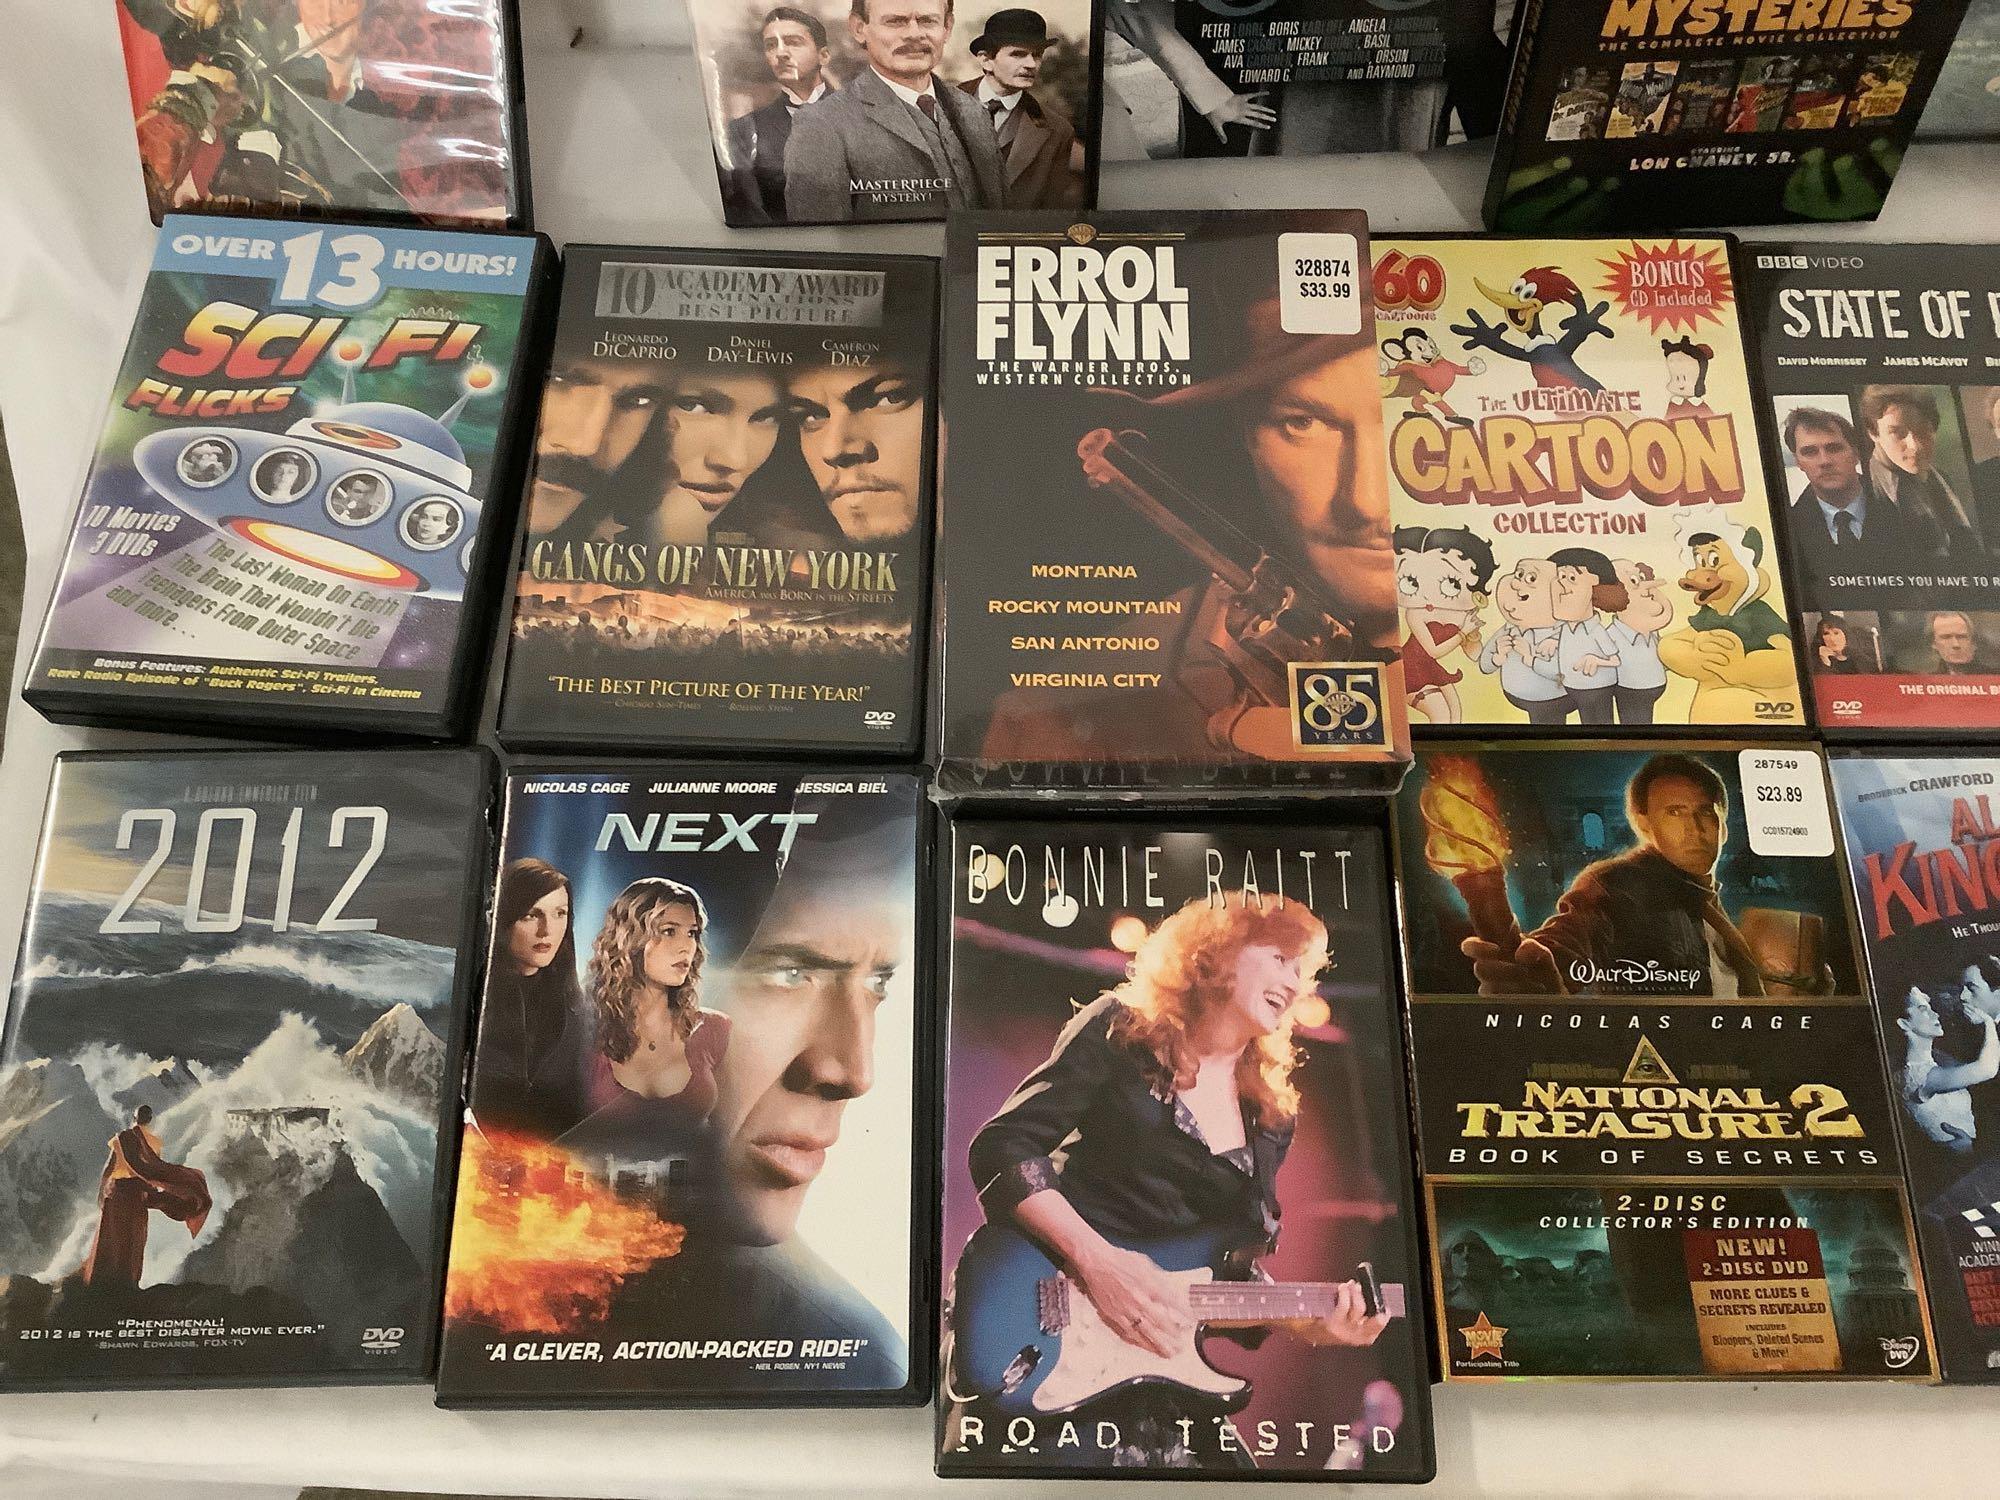 40+ DVD videos; action, comedy, classic movies, sci-fi, collections and more.